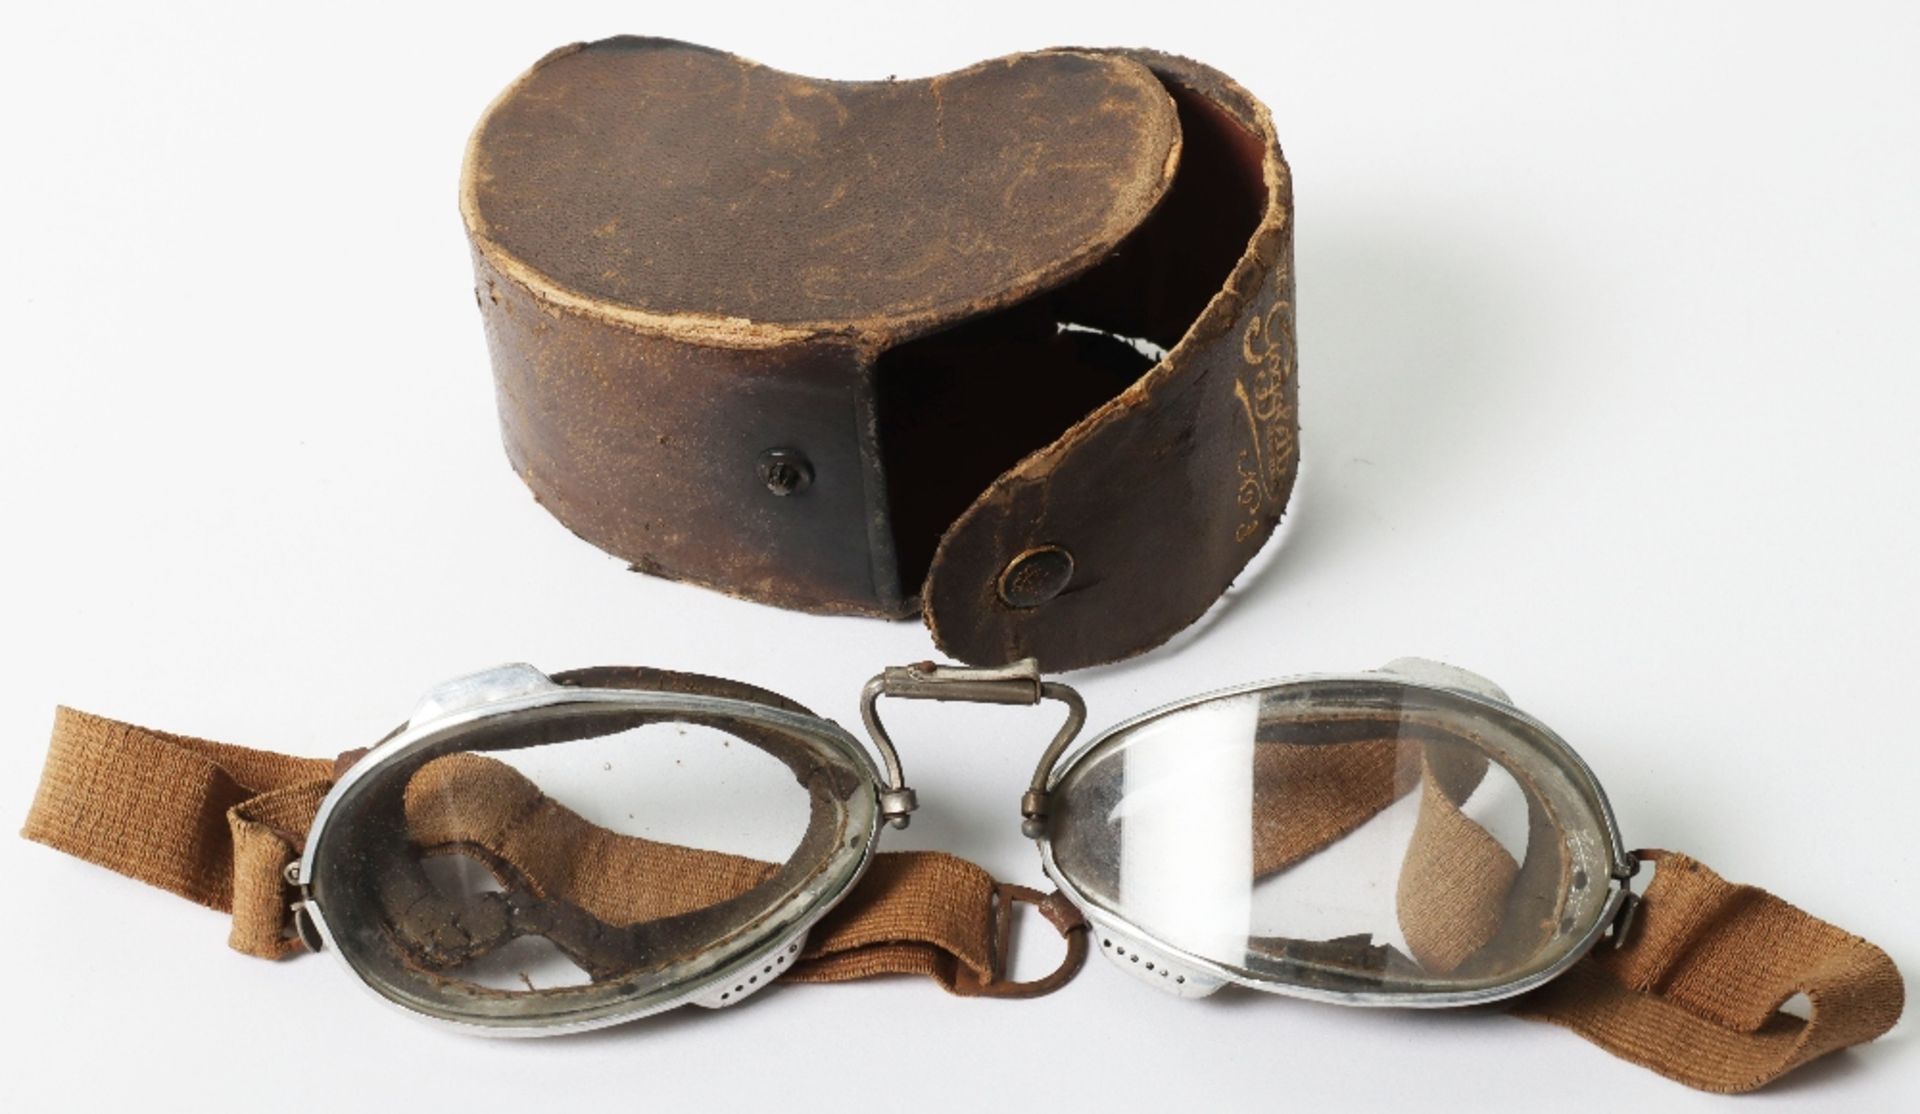 Pair of Vintage Gogglette Goggles